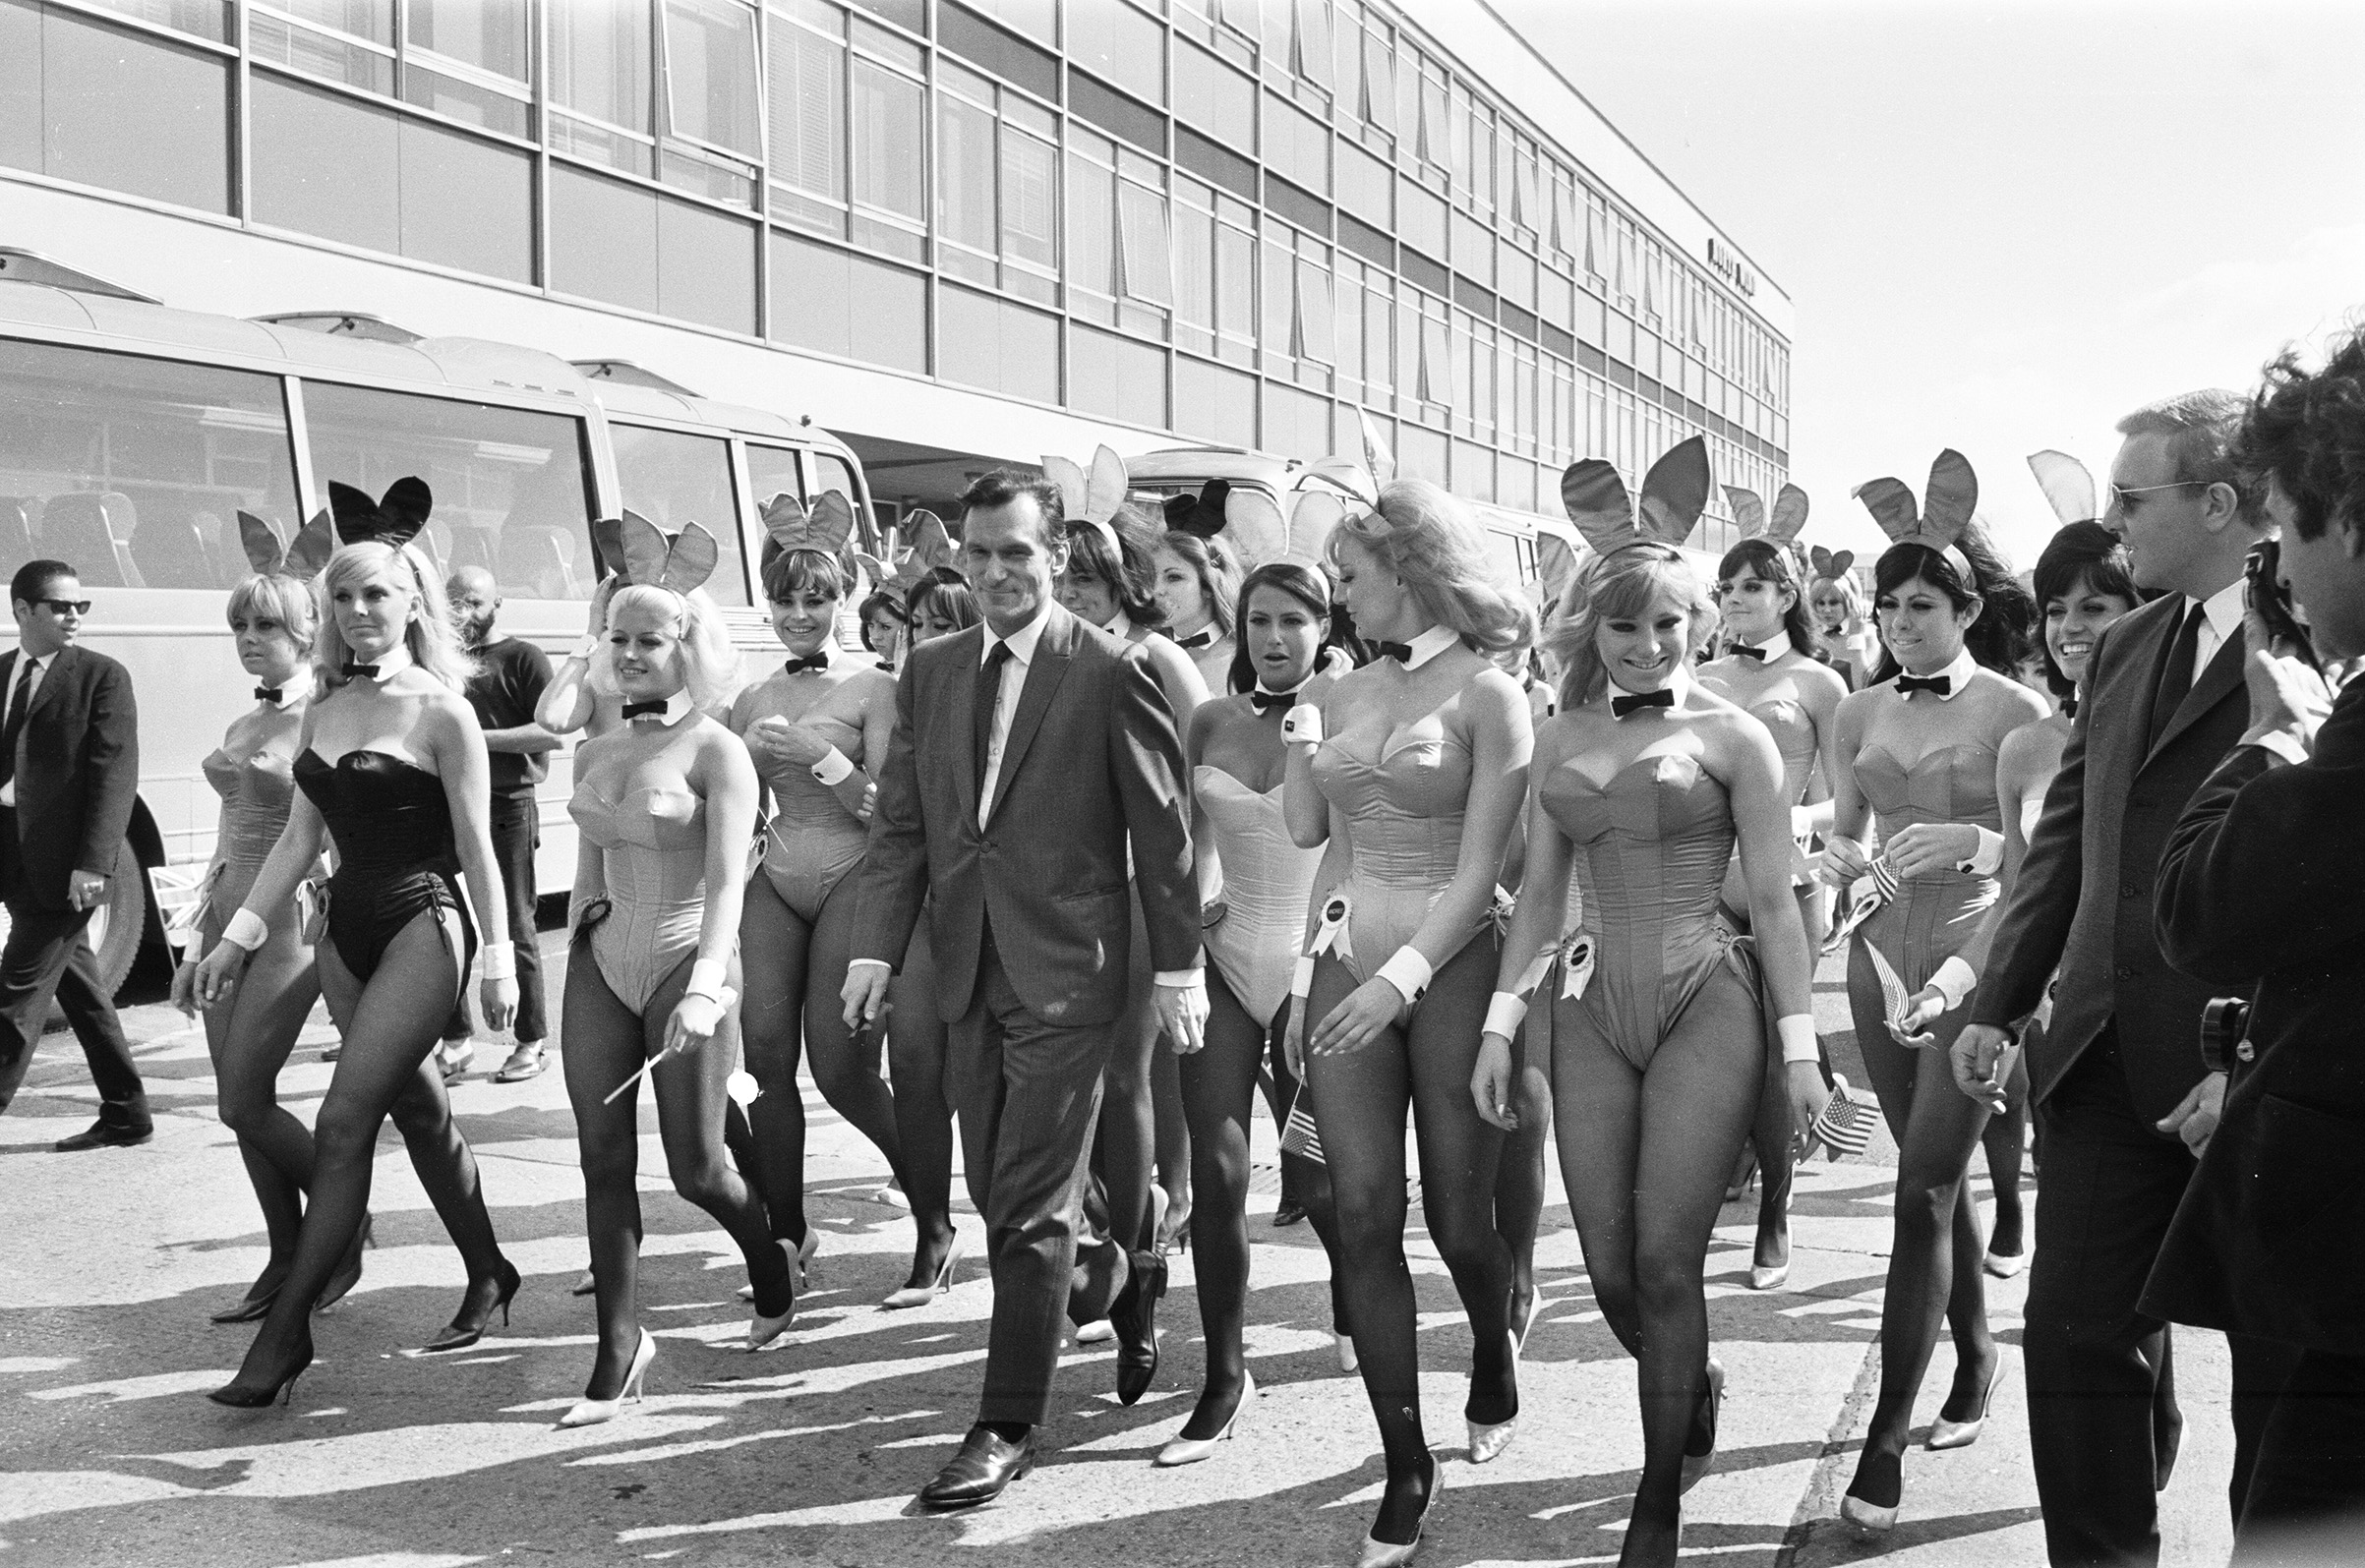 Hugh Hefner arrives with an entourage of Bunny Girls at London Heathrow Airport, June 25, 1966. (Sunday People/Mirrorpix/Getty Images)